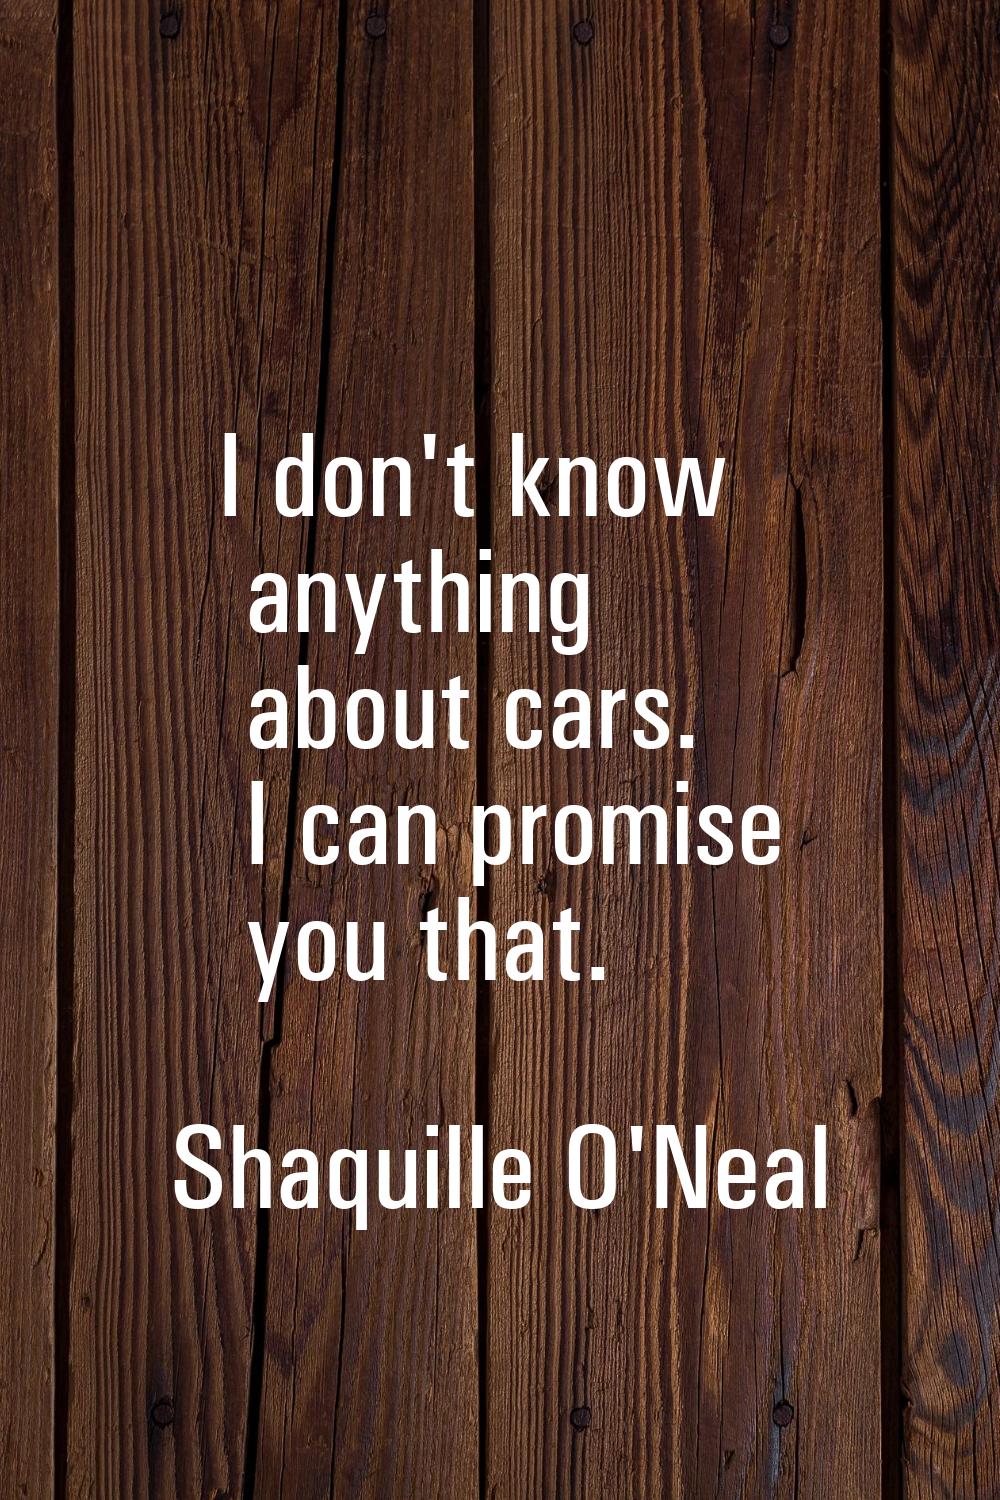 I don't know anything about cars. I can promise you that.